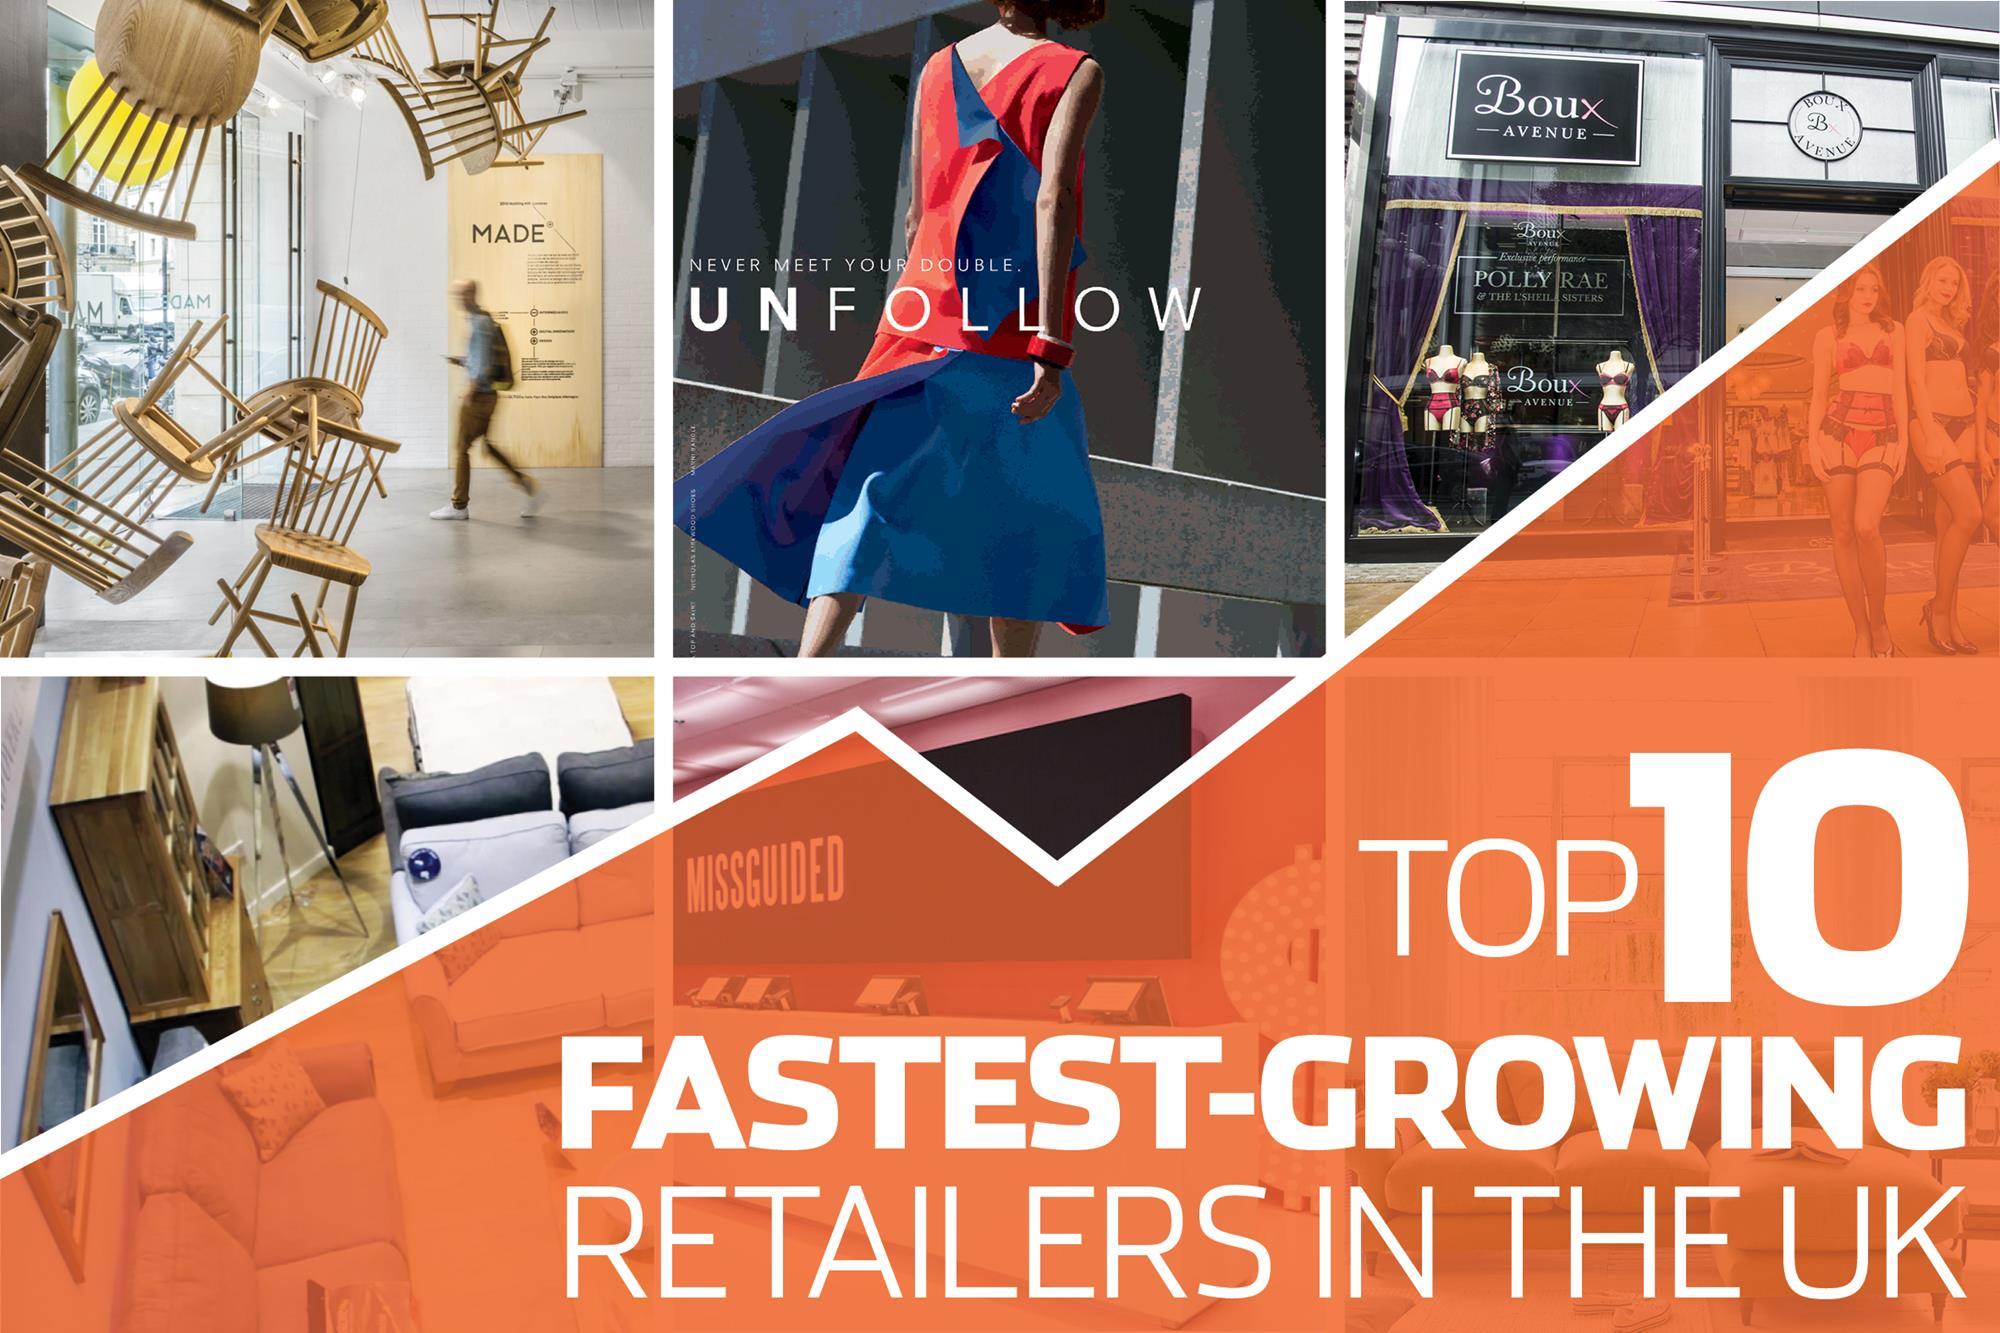 The top 10 fastest-growing retailers in the UK